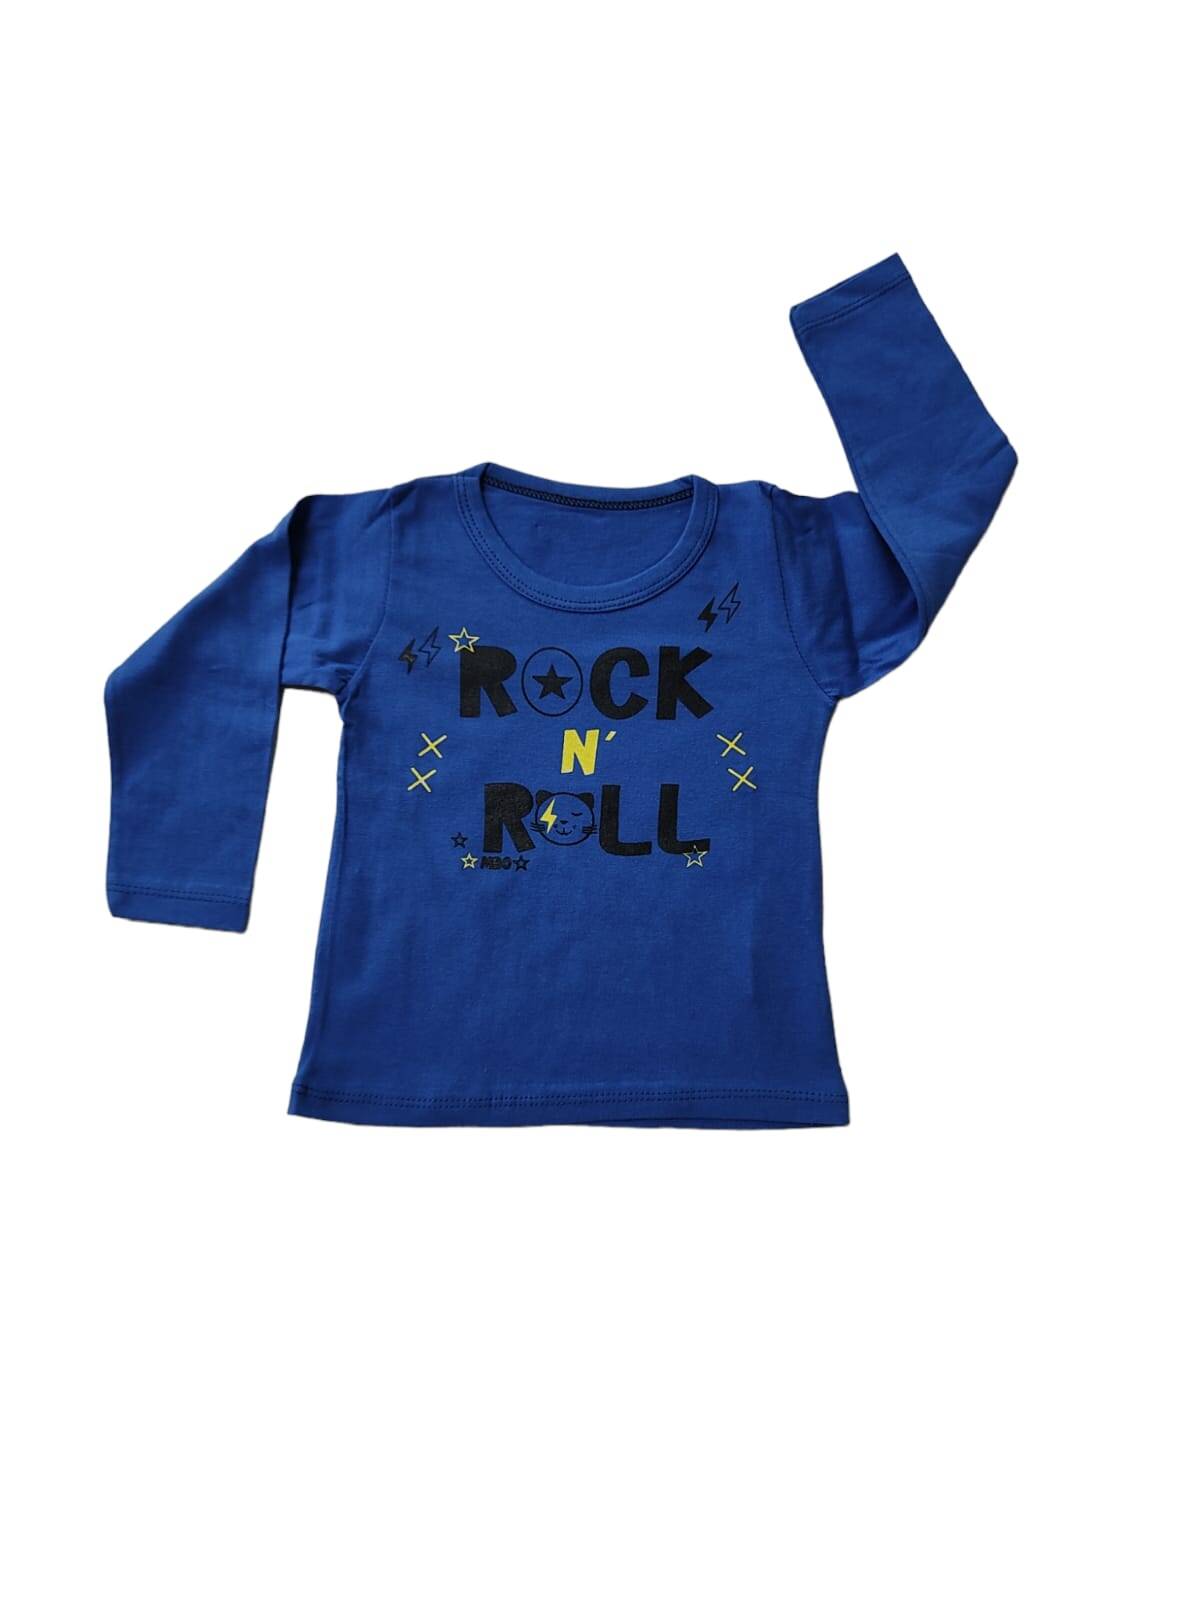 Imagen producto Remera Rock and roll Bebe 2